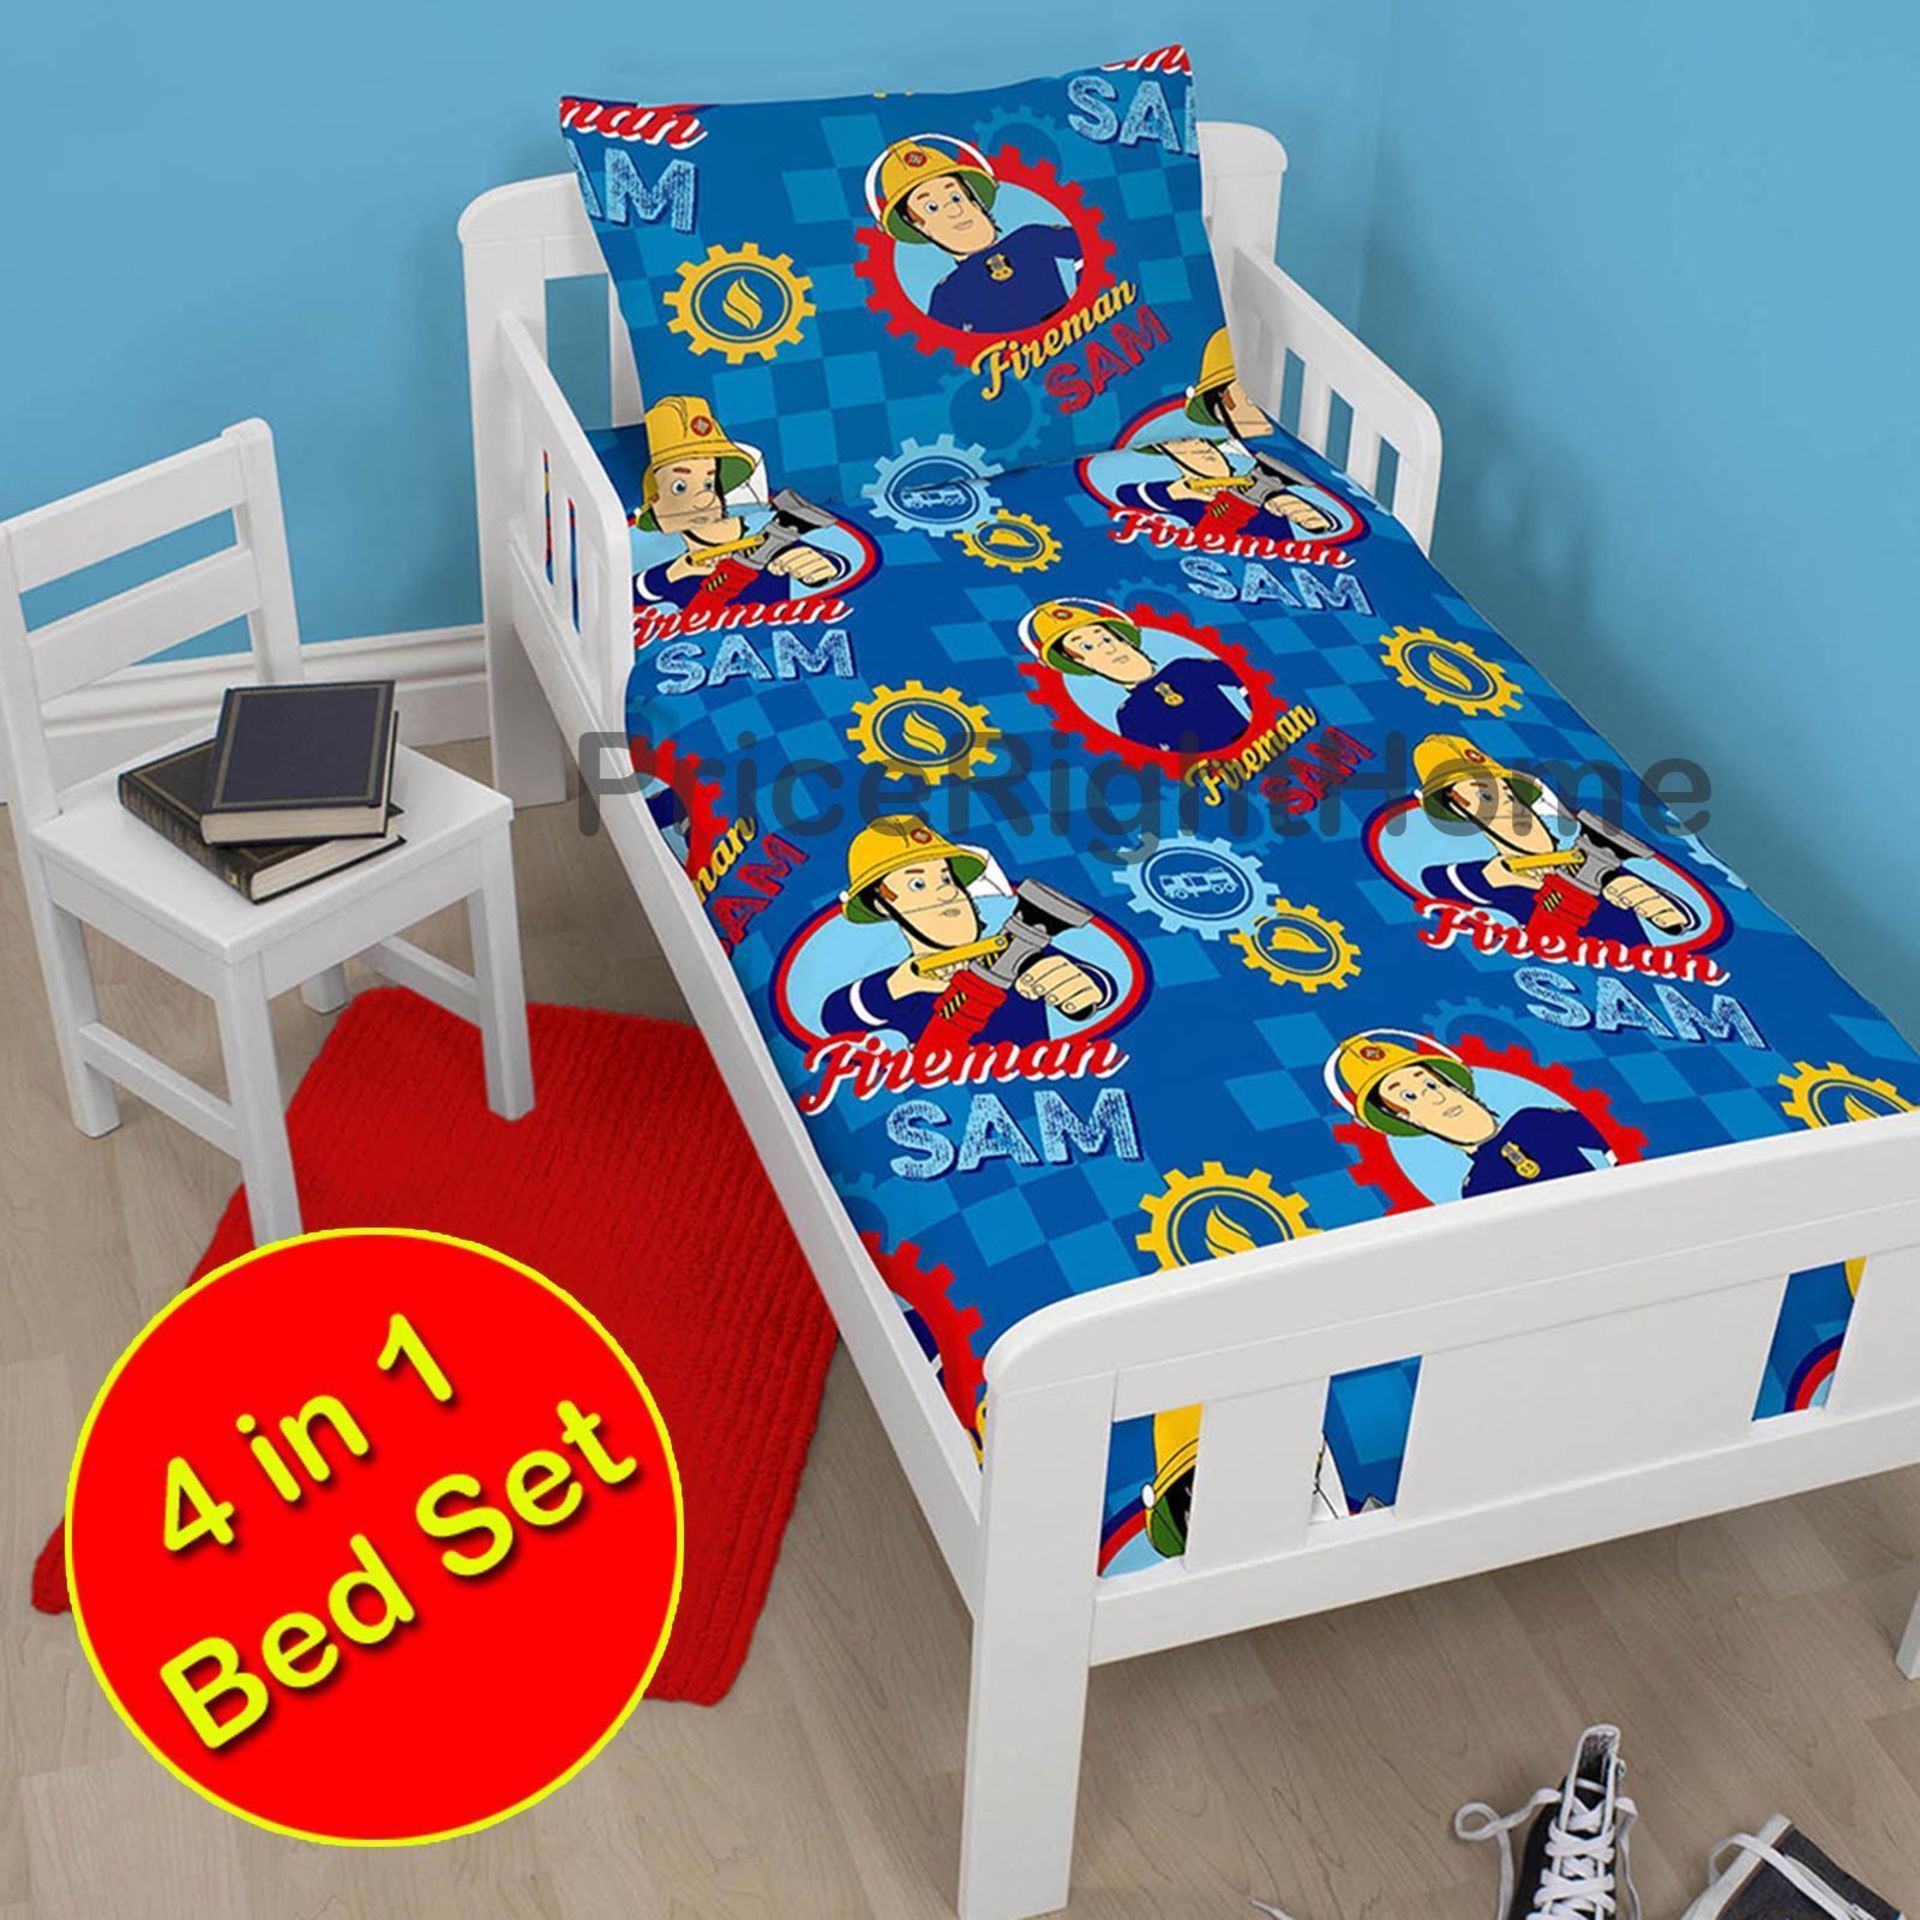 1 BRAND NEW BED IN A BAG FIREMAN SAM 4 PIECE JUNIO